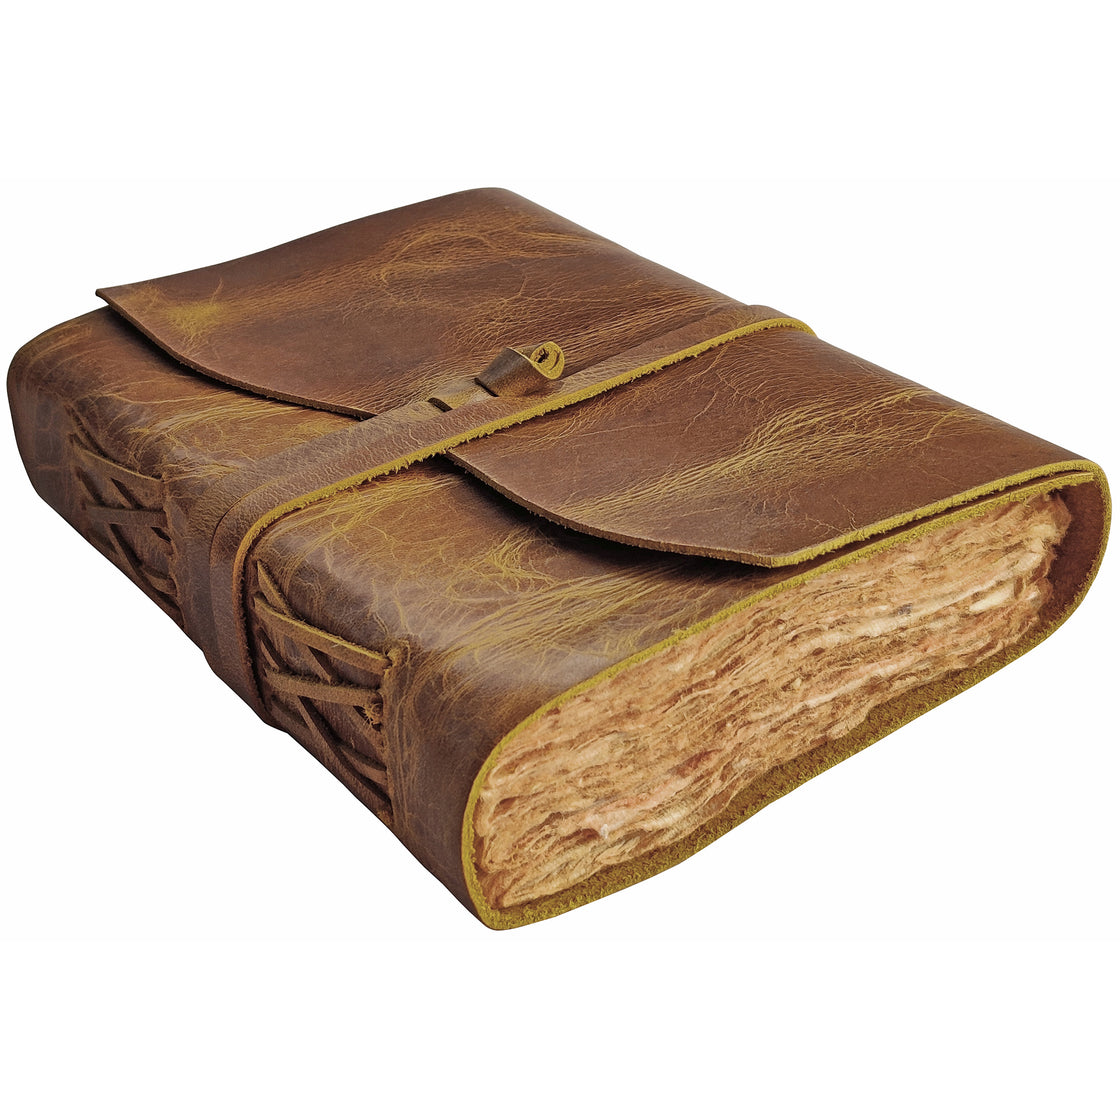 Leather Bound Journal - A5 Handmade Antique Deckle Edge Paper, Rustic Yellow